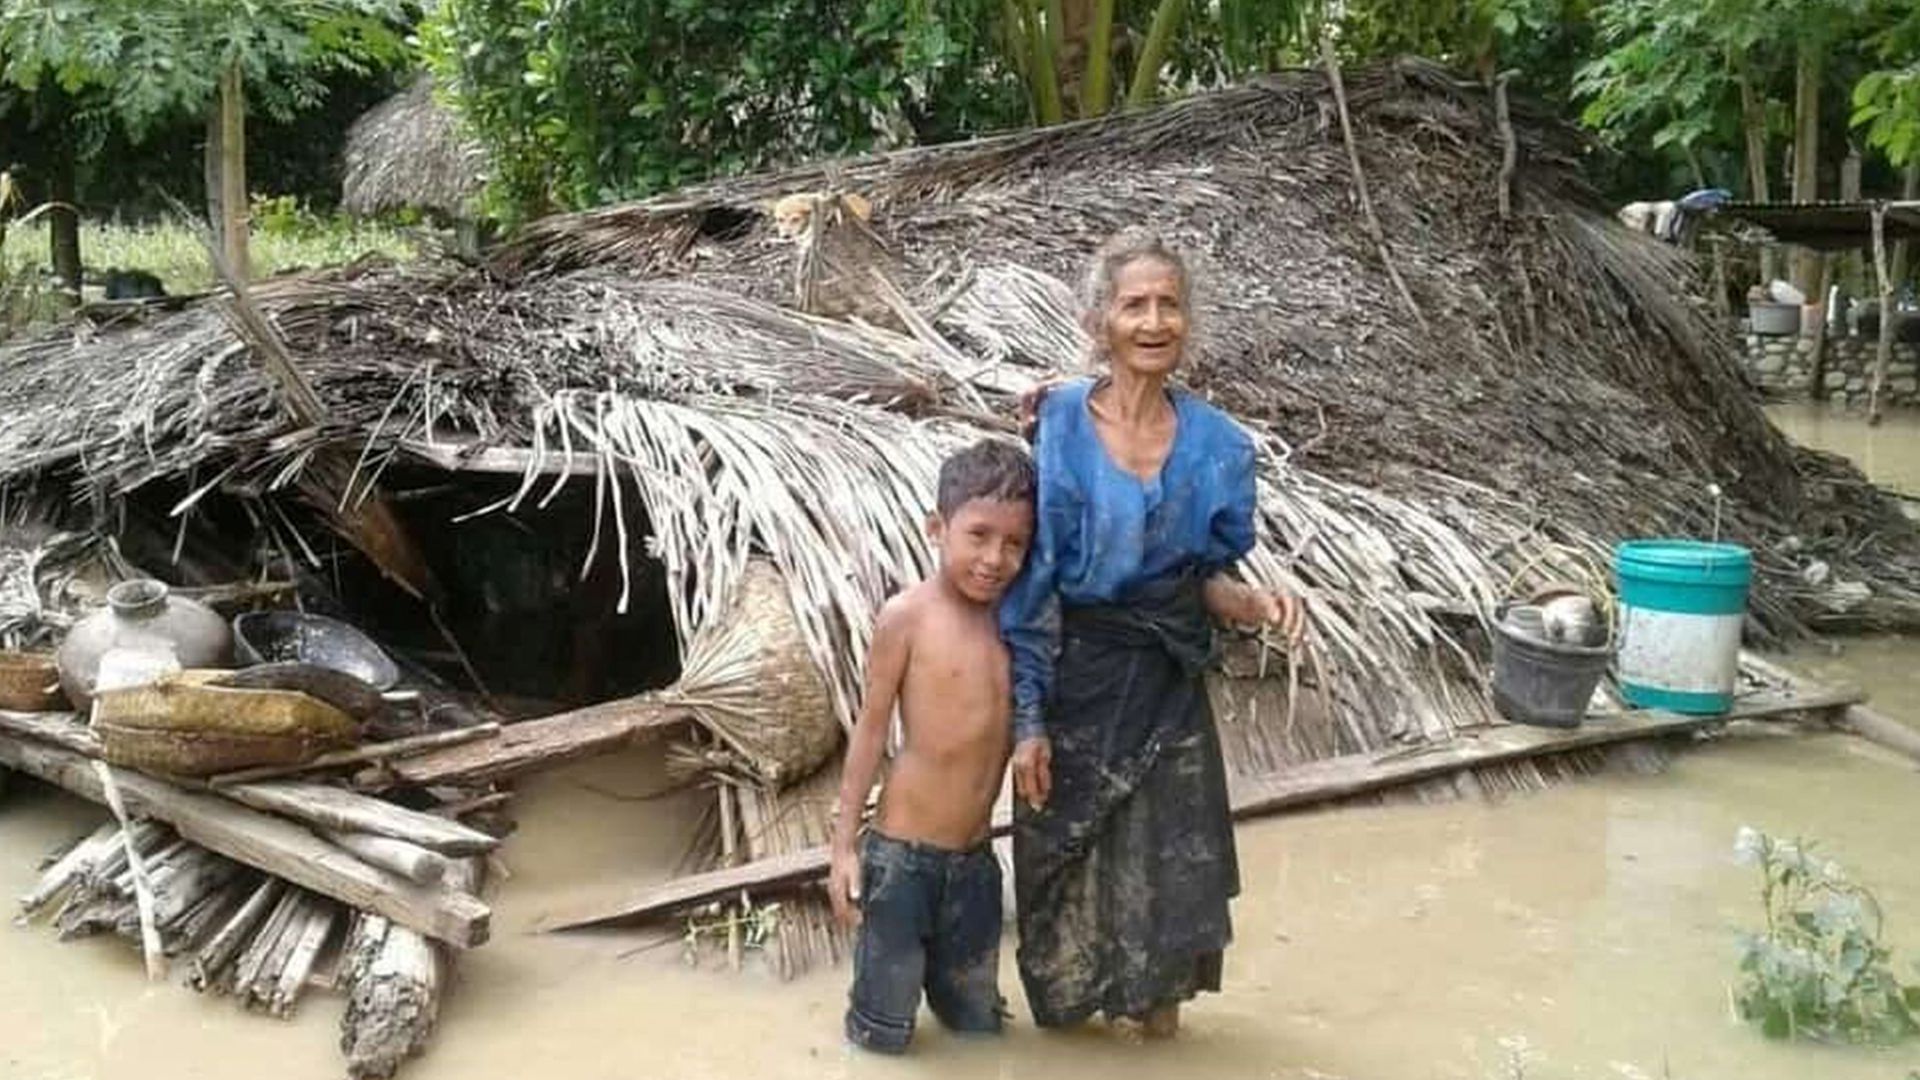 An elderly villager and her grandson stand in floodwaters in front of their damaged home in the village of Haitimuk in East Flores on April 4